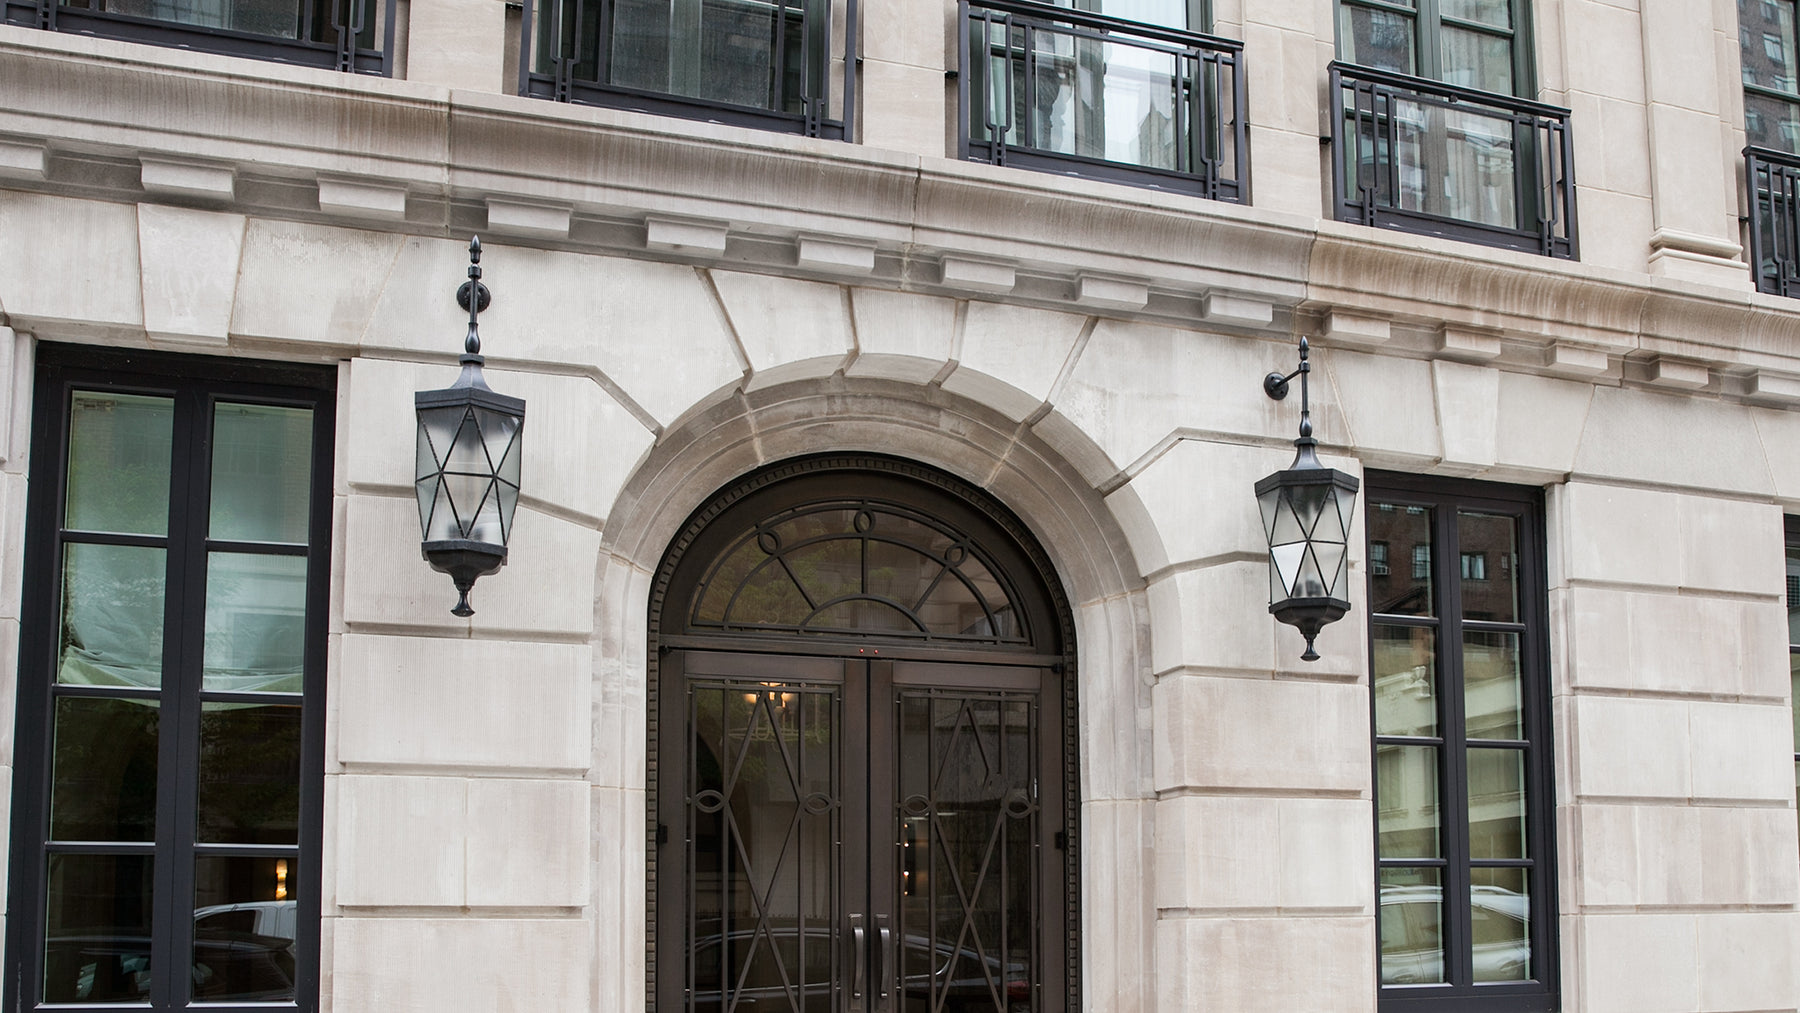 A facing view of a pair of leaded glass and bronze exterior wall lanterns surrounding the limestone entry of an Upper East Side apartment building. The polyhedral lantern bodies consist of frosted glass lenses in a double hexagonal antiprism and are held between massive bronze castings.